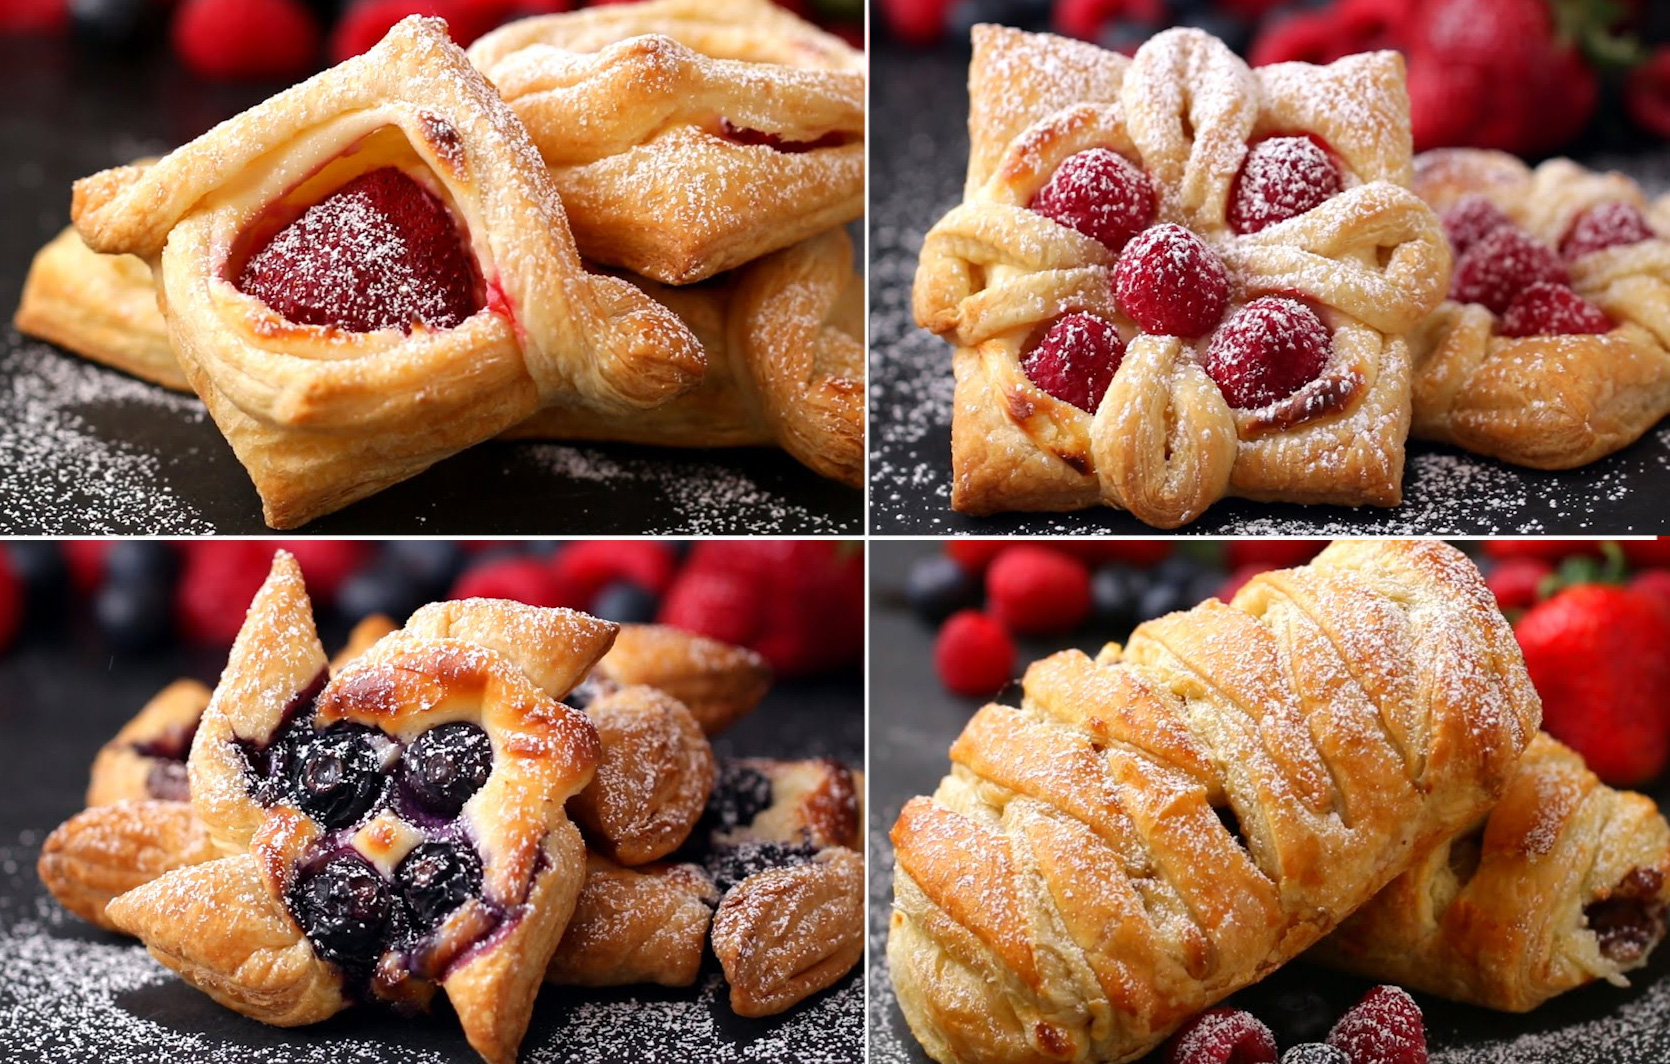 How to make Puff Pastry at Home